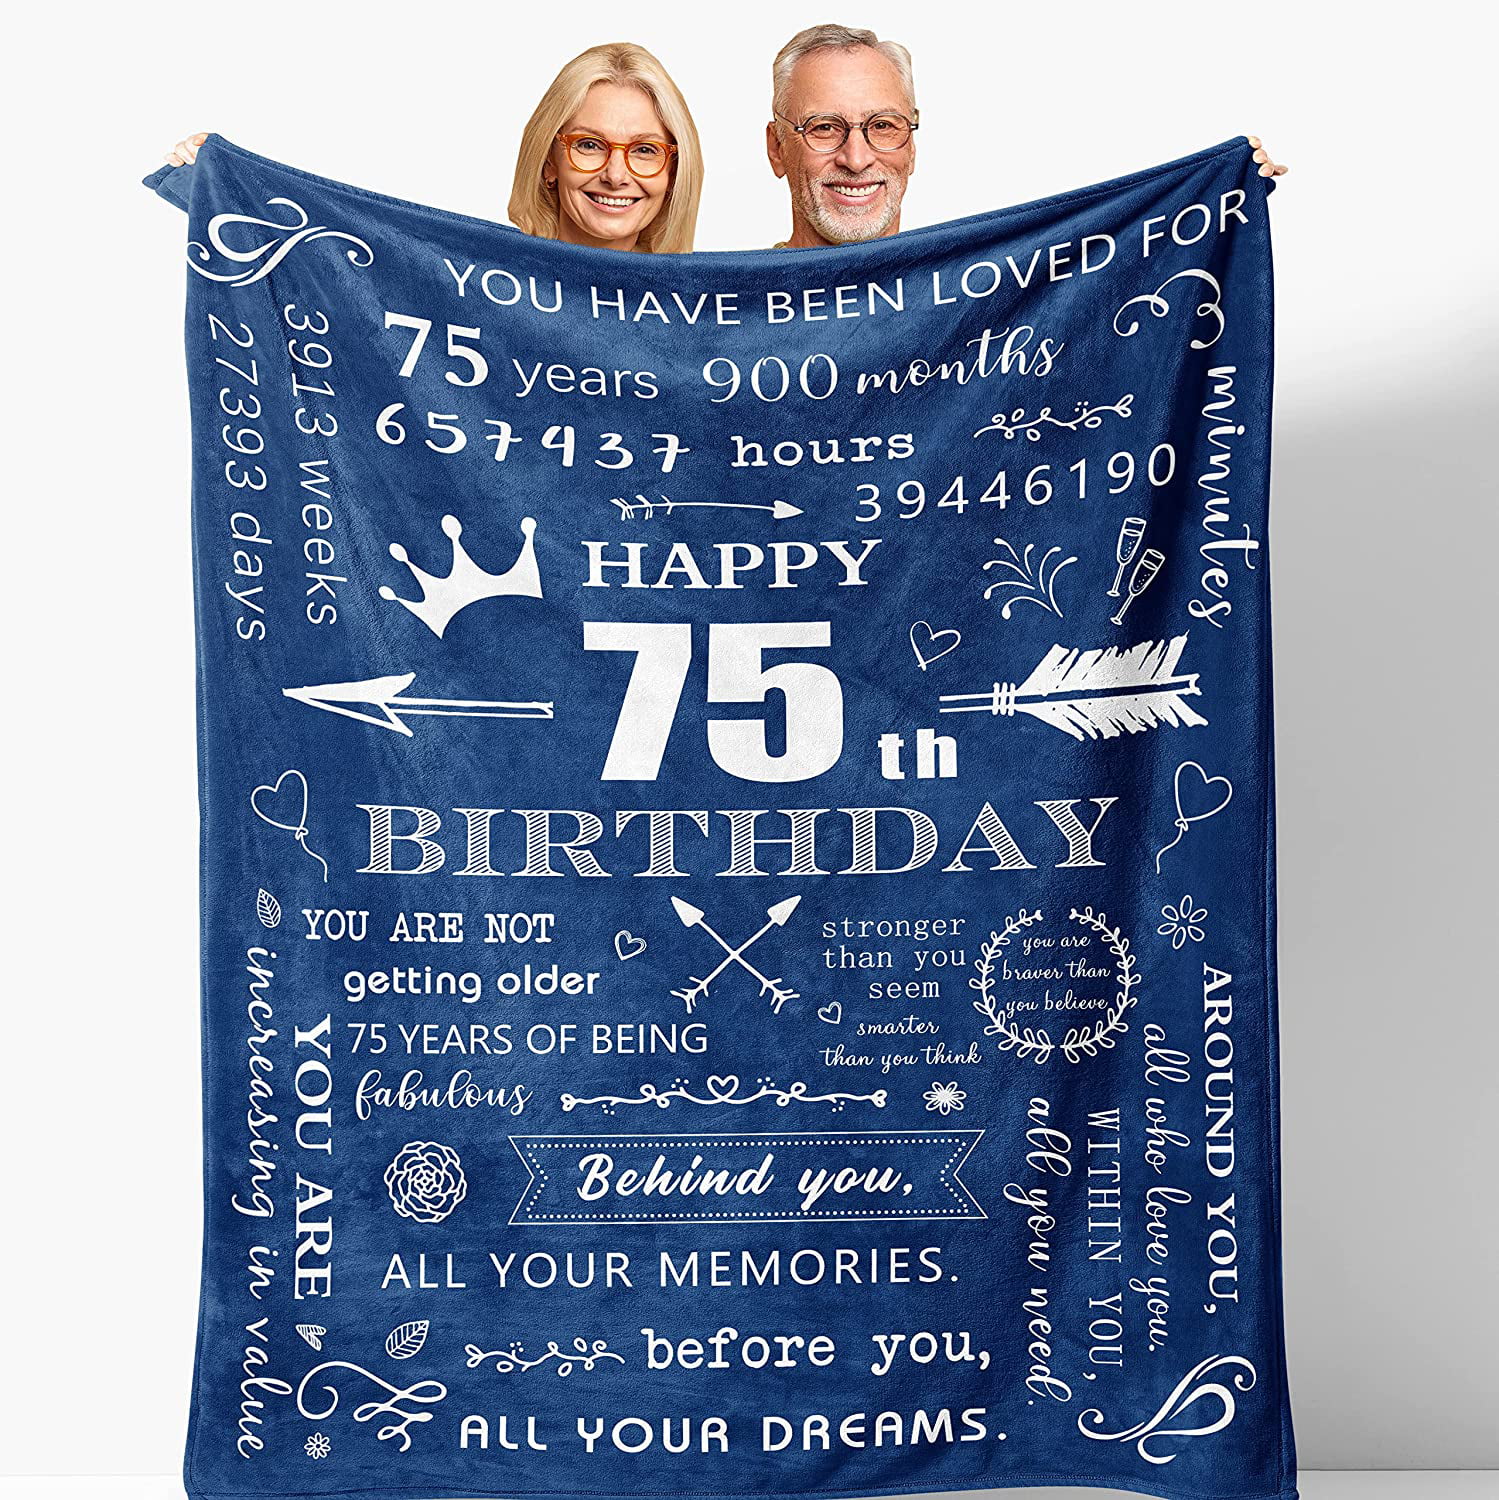  65th Birthday Gifts For Women, 65th Birthday Decorations, 65  Year Old Birthday Gifts For Women, Gifts For 65 Year Old Woman, 65th  Birthday Gift Ideas, Best Gifts For 65 Year Old